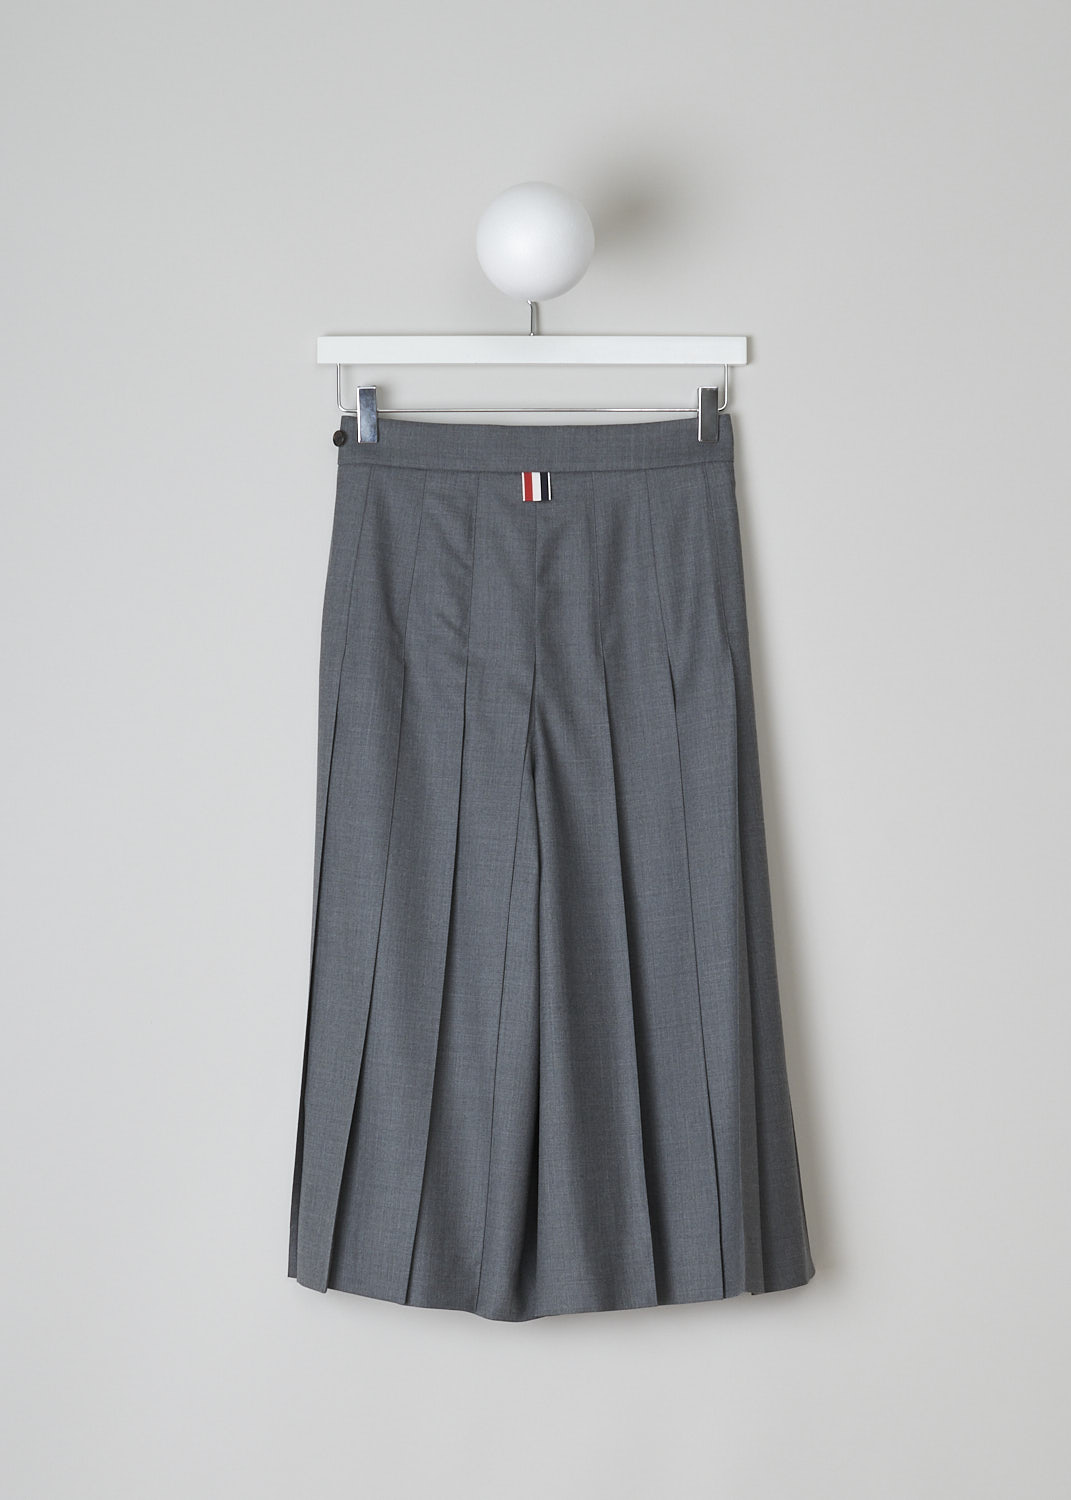 THOM BROWNE, PLEATED CULOTTES IN MID GREY, FTC379A_00626_035, Grey, Back, These mid grey pleated culottes have a concealed zip closure to one side with a button tab on the waistband. These culottes hit below the knee. In the back, the brand's signature tricolored pull-tab can be found.
